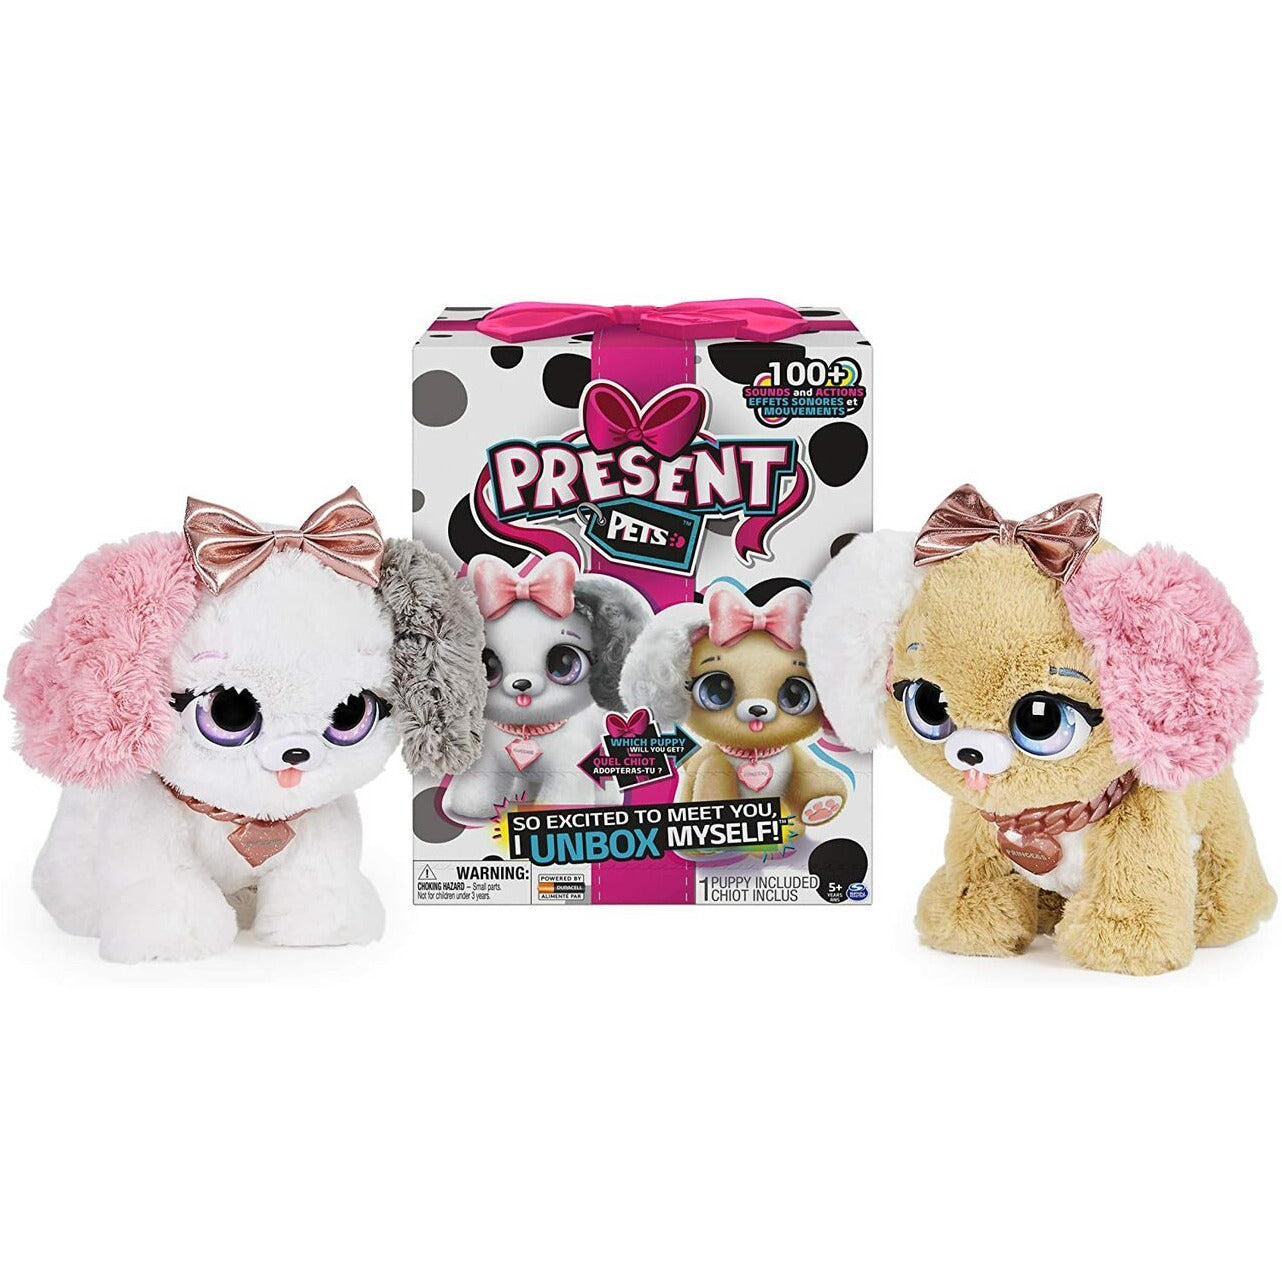 Present Pets, Fancy Puppy Interactive Plush Pet Toy with Over 100 Sounds and Actions (Style May Vary)